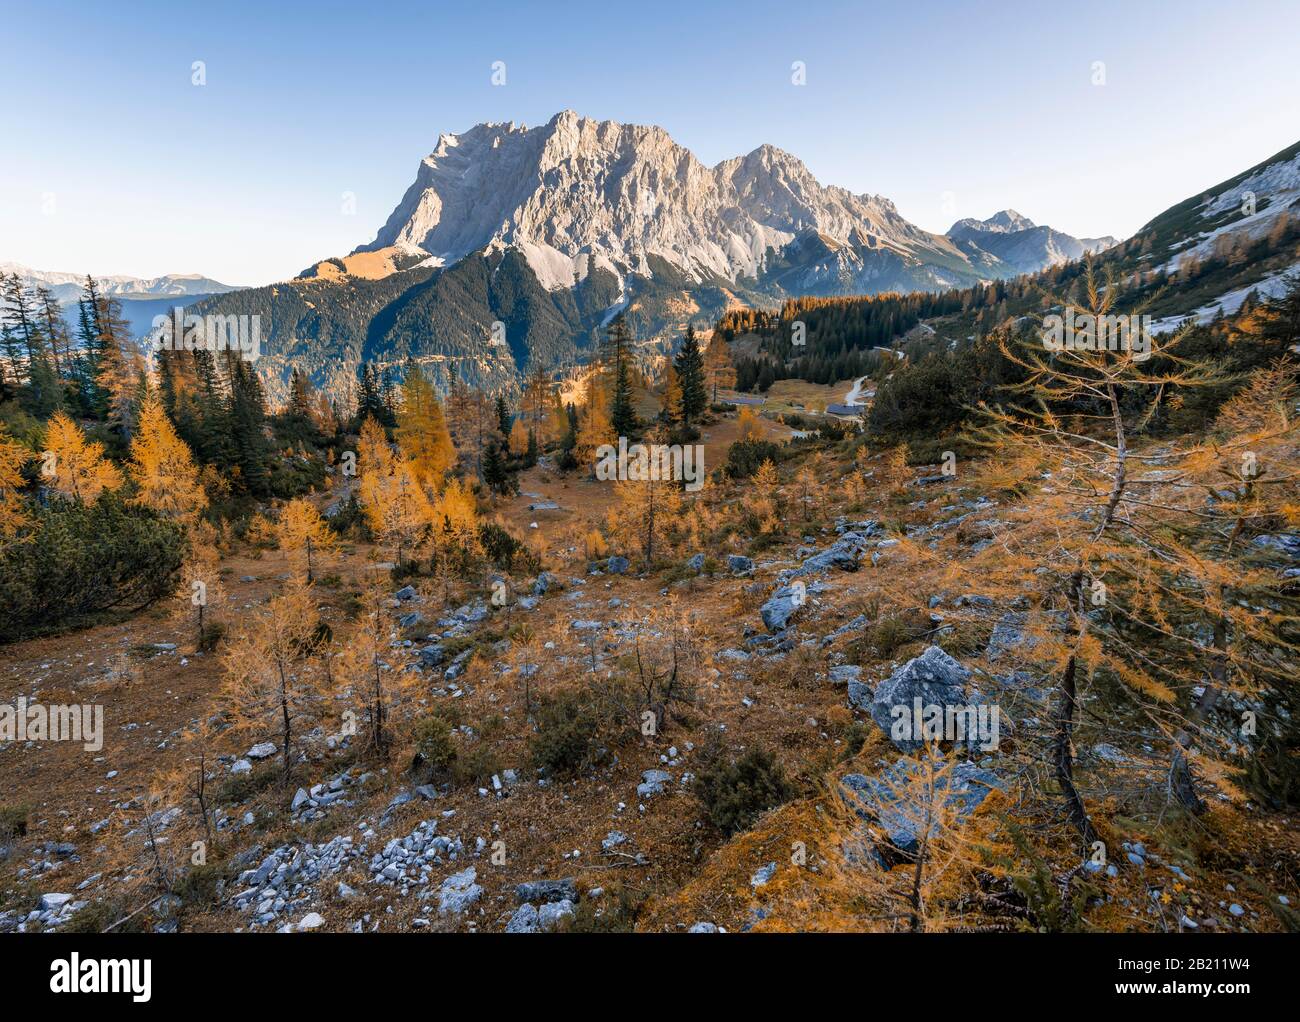 View of the Zugspitze, autumn colouring with yellow larches, Ehrwald, Wetterstein range, Tyrol, Austria Stock Photo